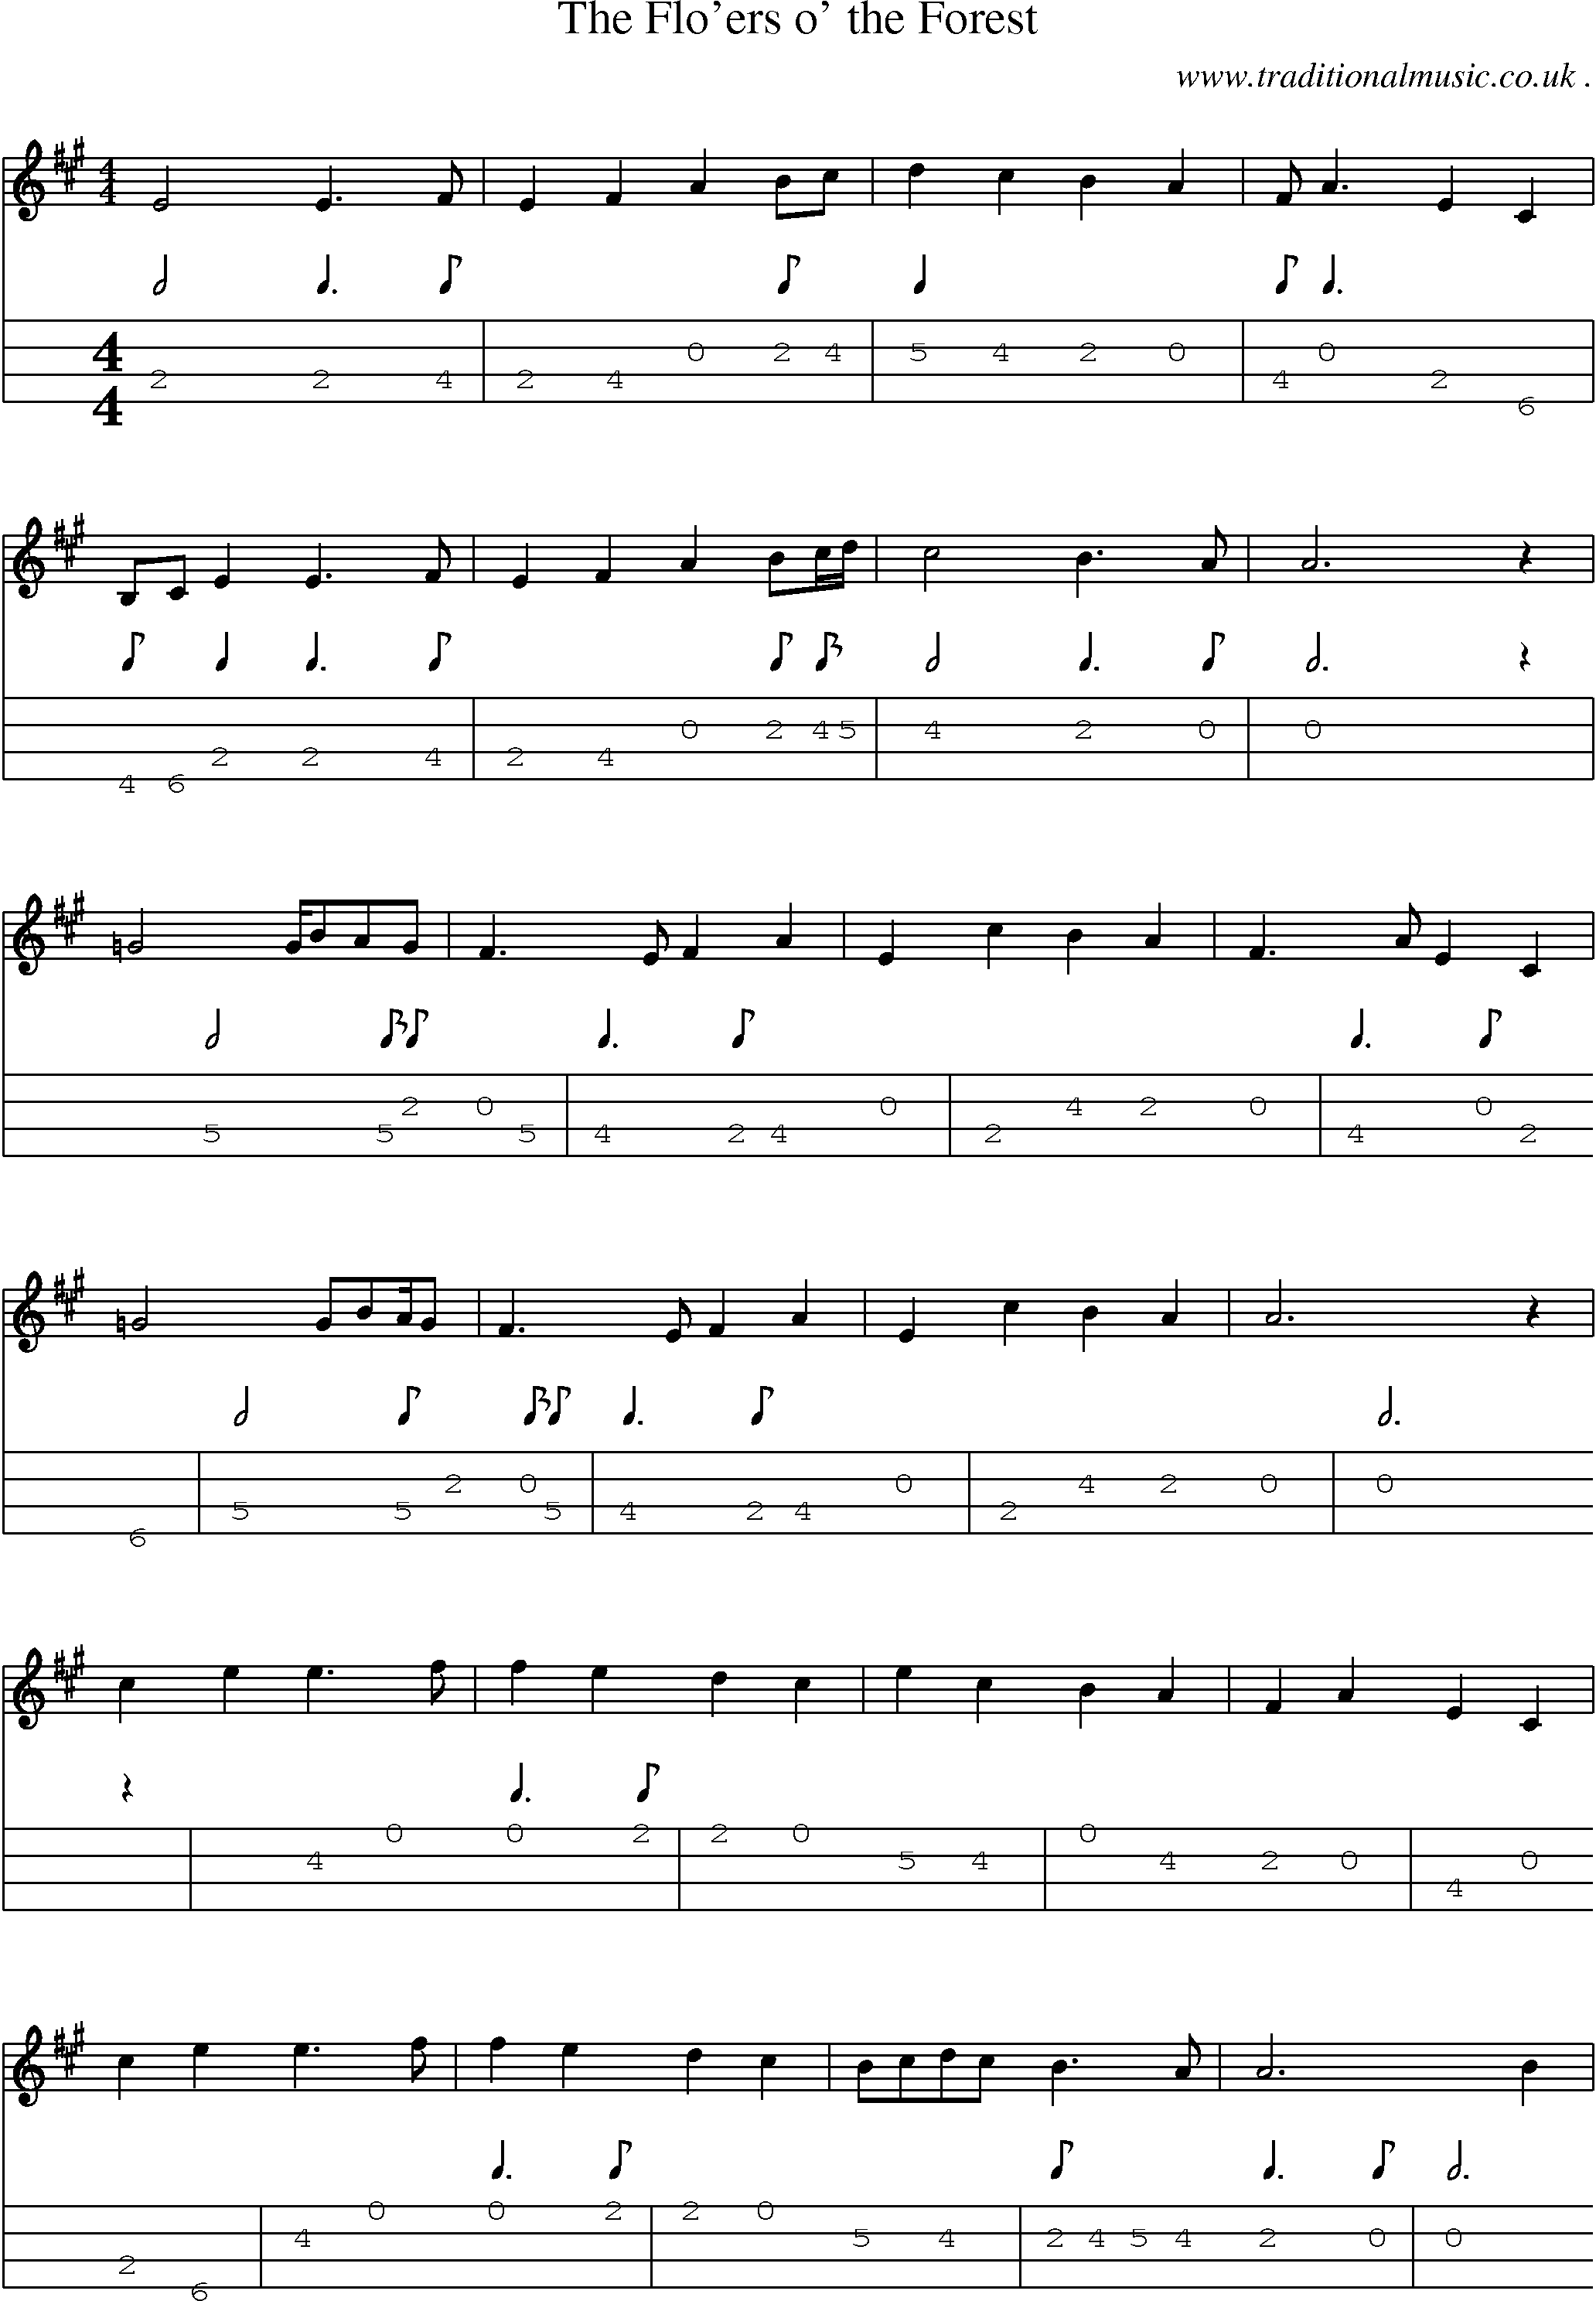 Sheet-music  score, Chords and Mandolin Tabs for The Floers O The Forest